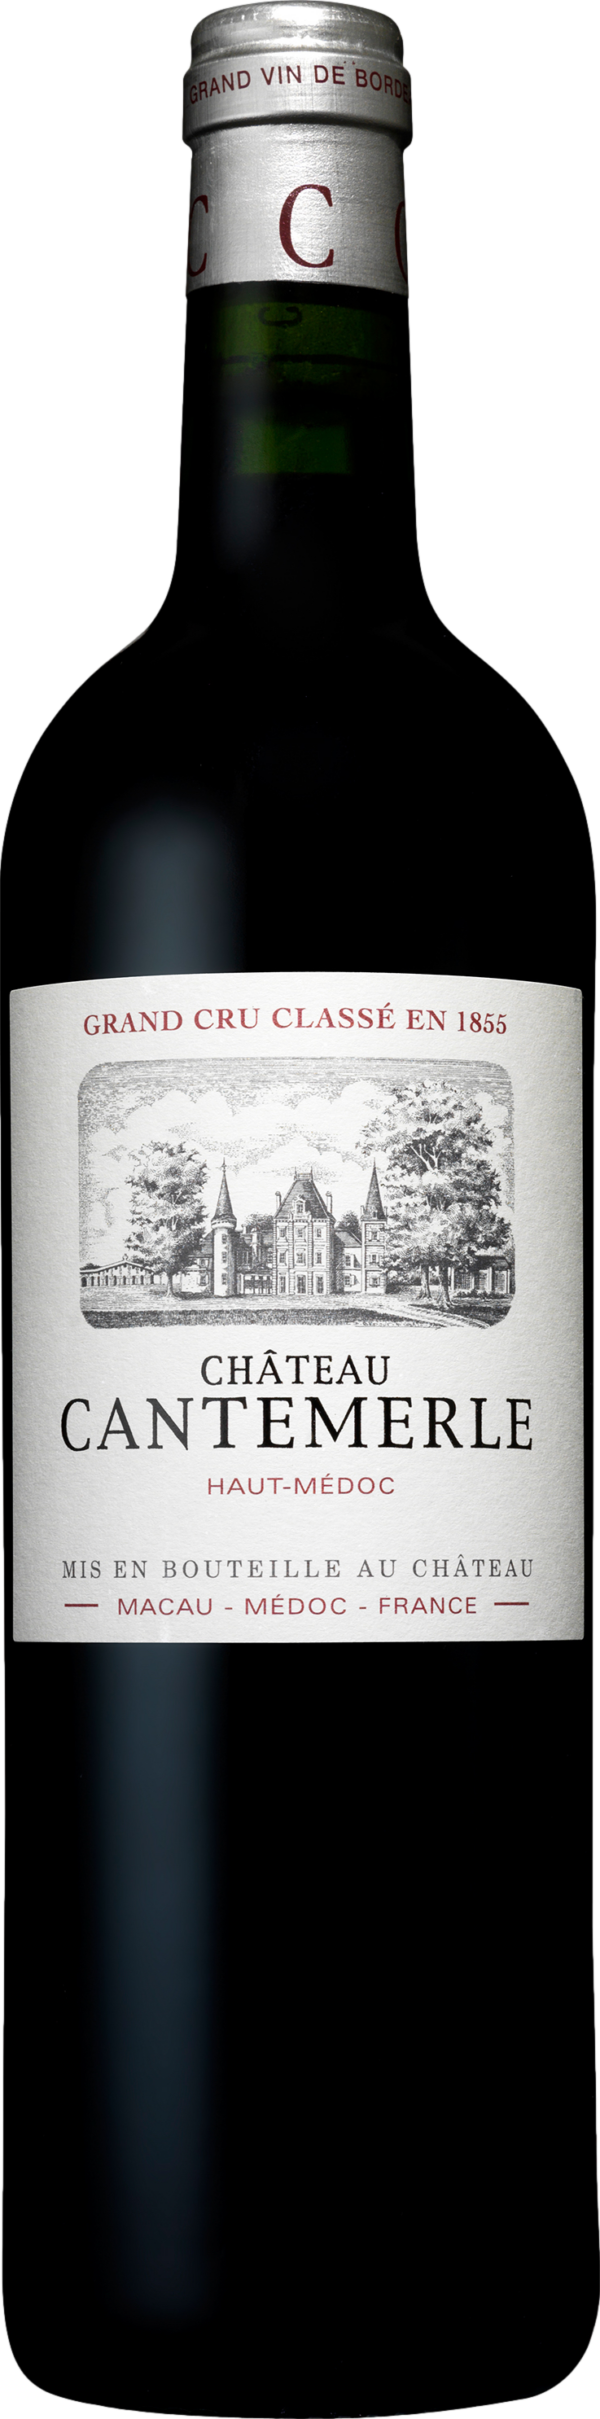 Product image of Chateau Cantemerle Haut Medoc 2017 from 8wines